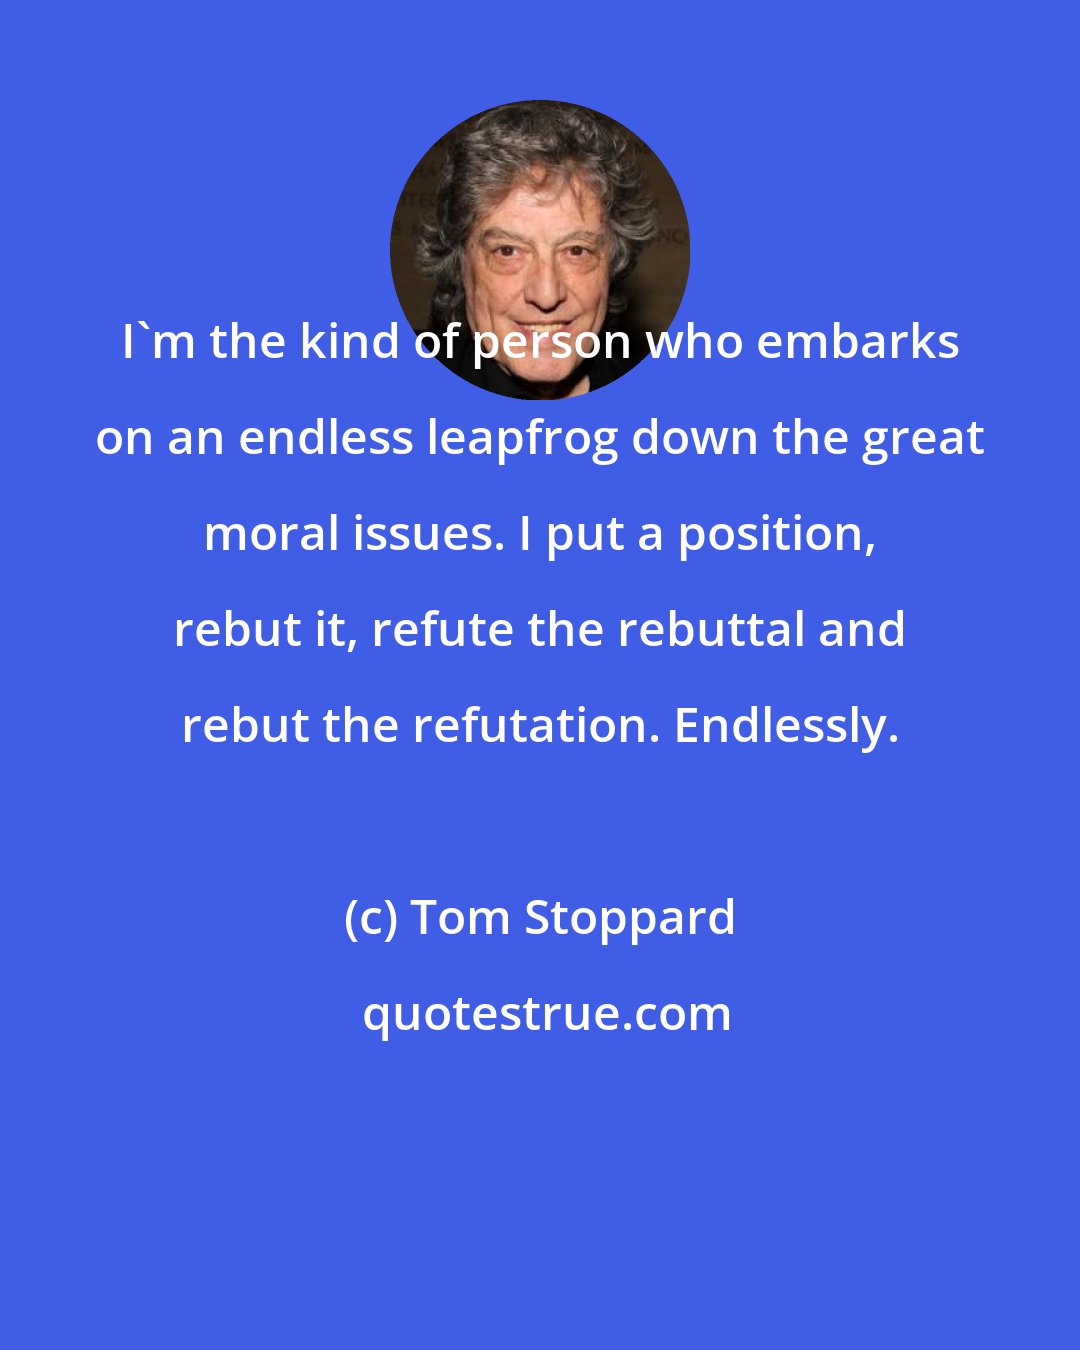 Tom Stoppard: I'm the kind of person who embarks on an endless leapfrog down the great moral issues. I put a position, rebut it, refute the rebuttal and rebut the refutation. Endlessly.